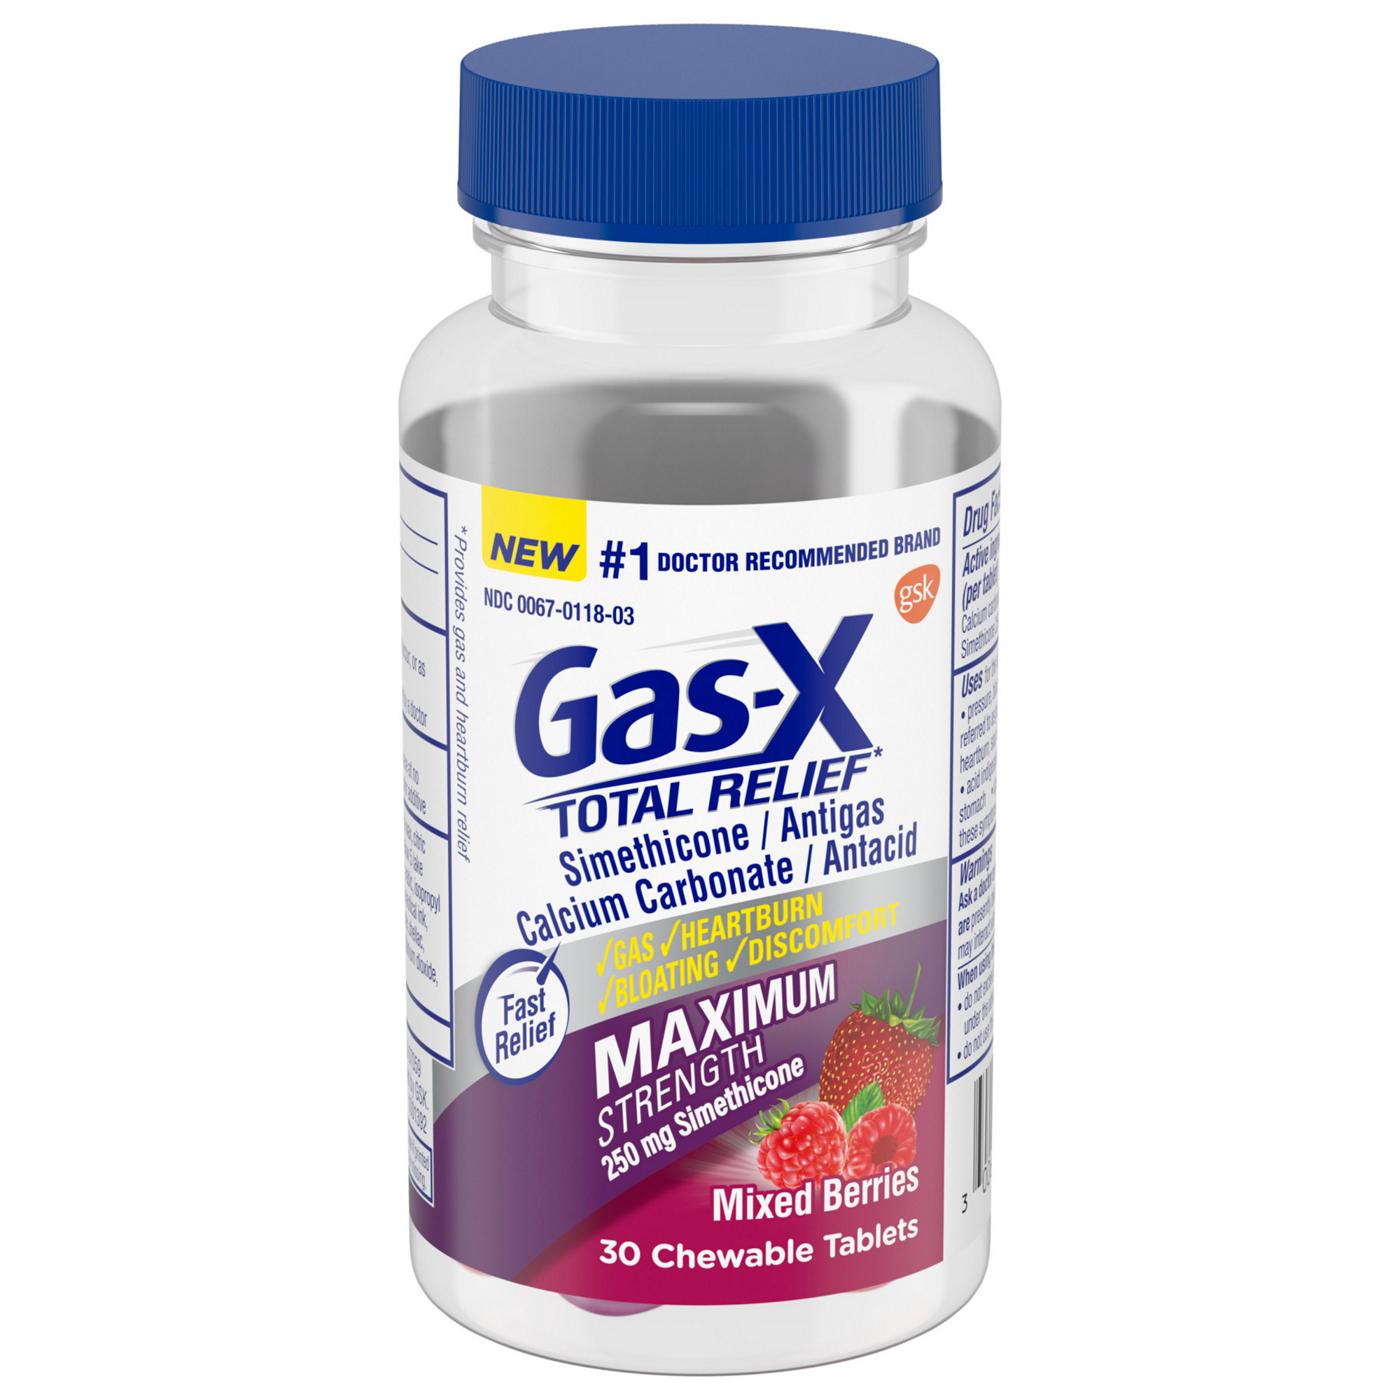 Gas-X Total Relief Maximum Strength Mixed Berries Chewable Tablets; image 1 of 8